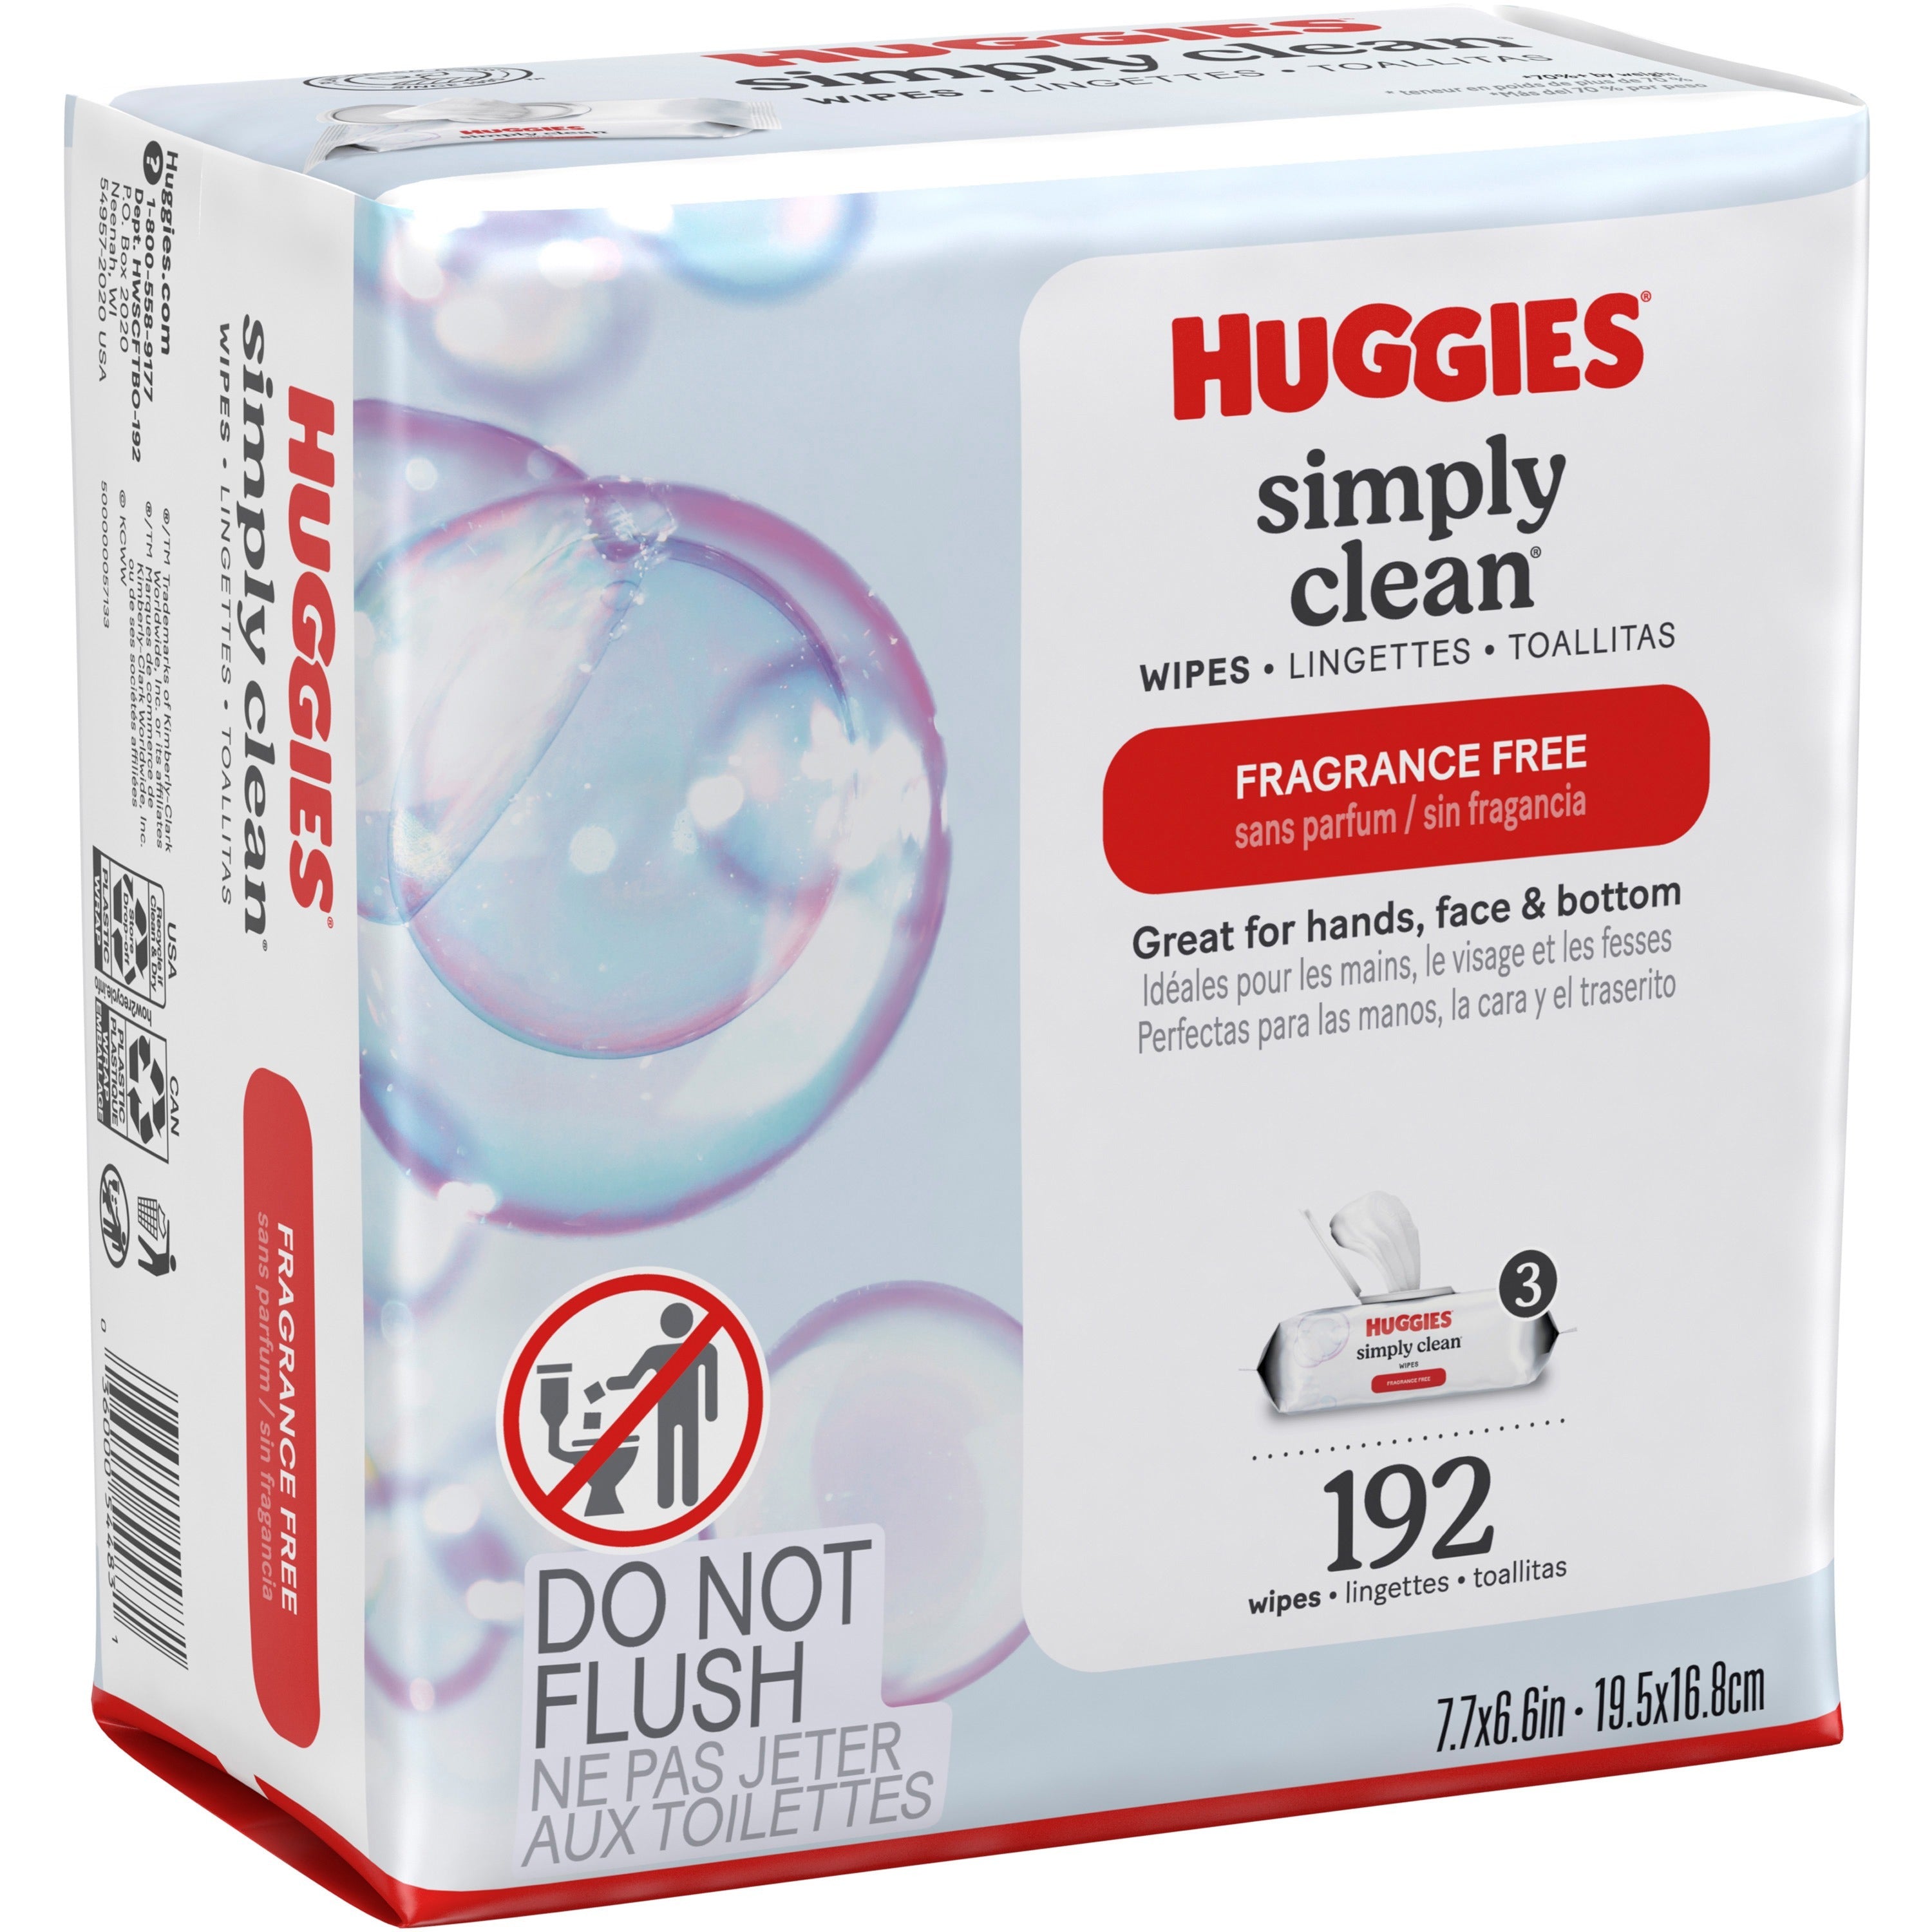 huggies-simply-clean-wipes-white-unscented-hypoallergenic-ph-balanced-fragrance-free-alcohol-free-paraben-free-phenoxyethanol-free-for-hand-skin-face-1-each_kcc54483 - 4